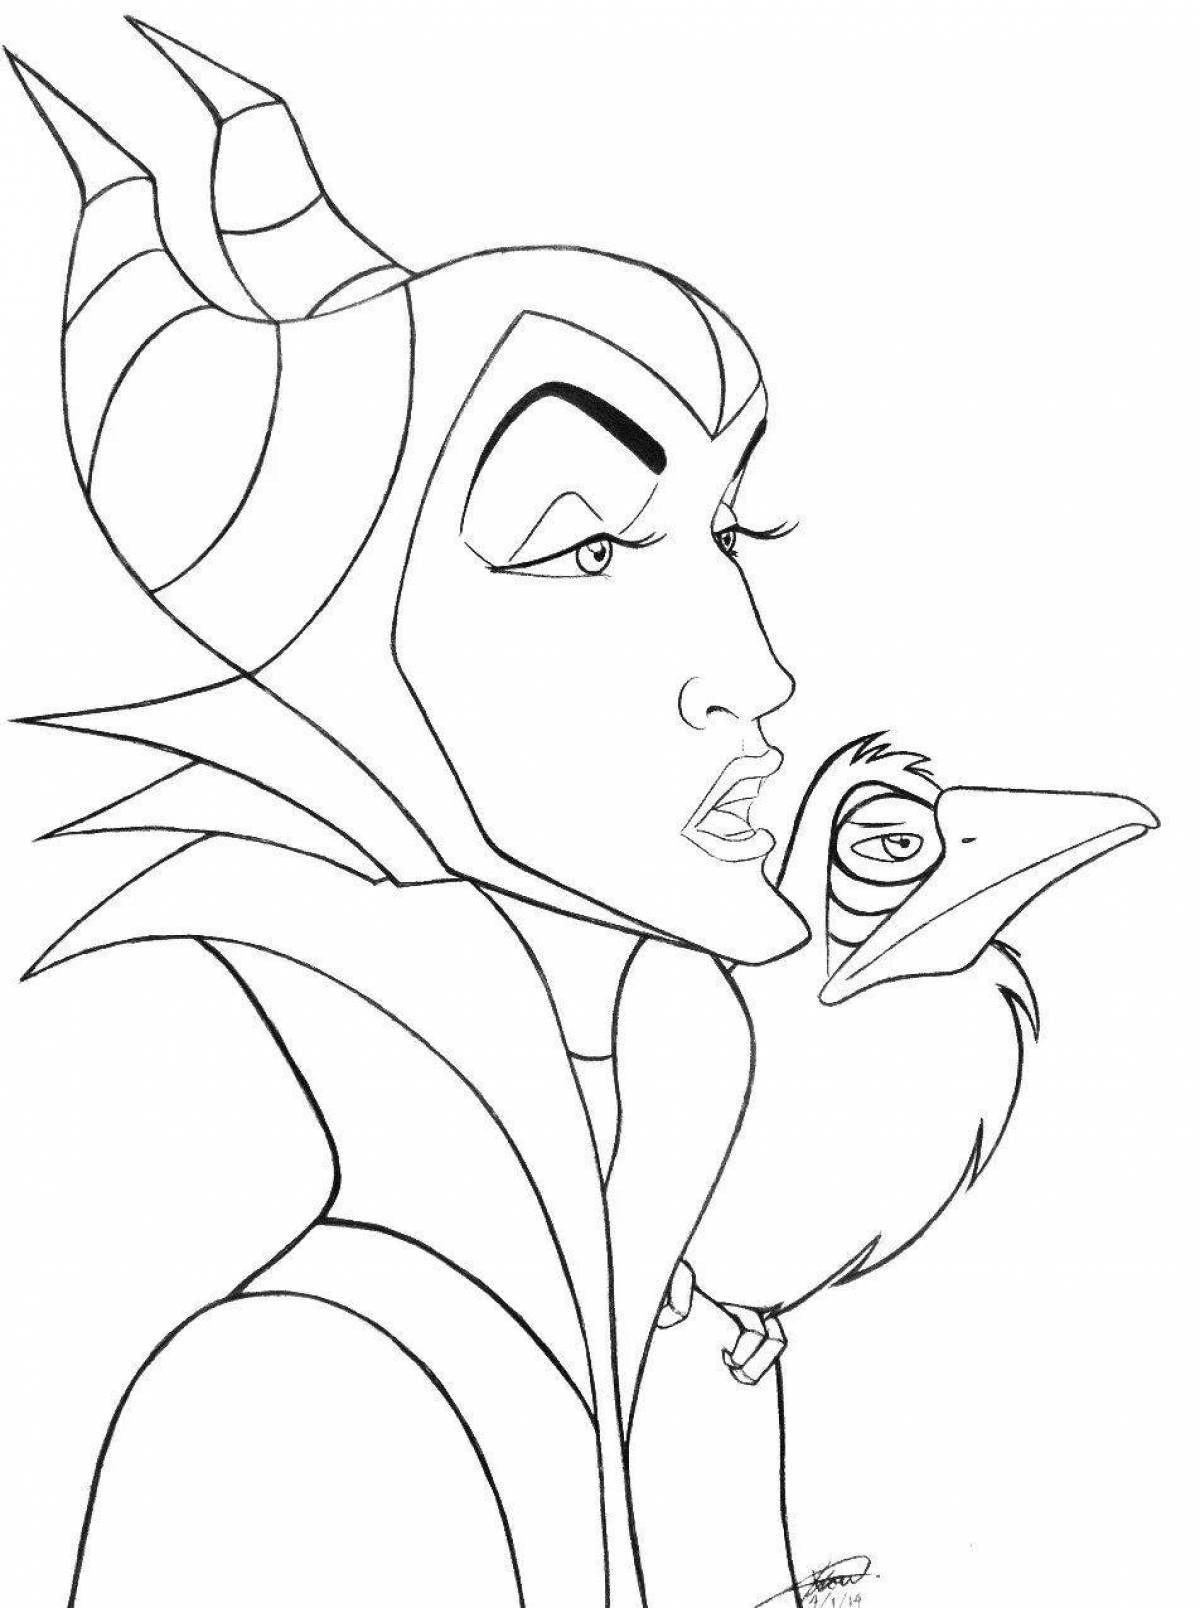 Impressive maleficent coloring book for kids